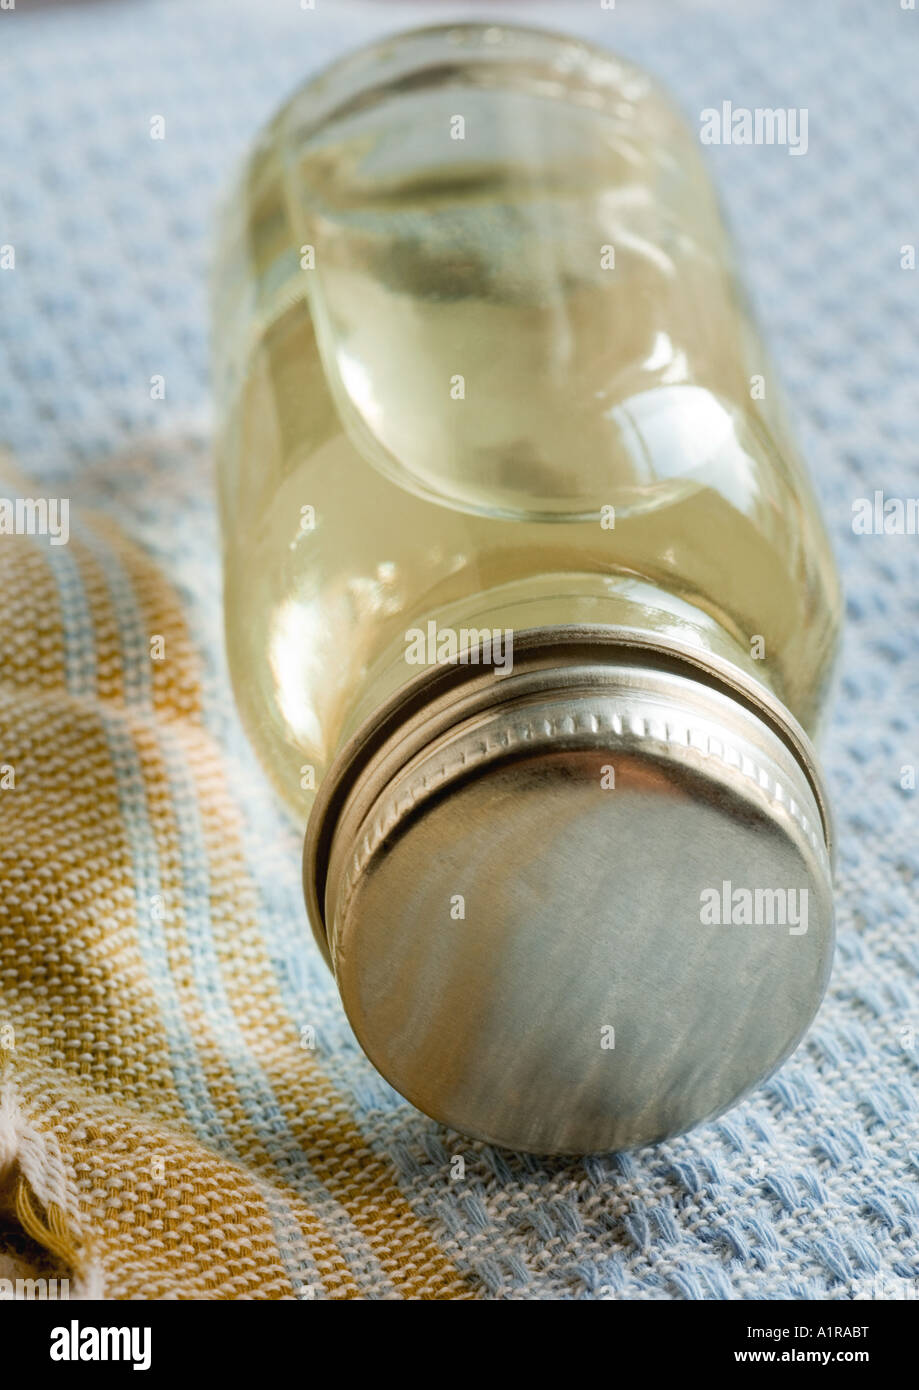 Bottle of essential oil on side, on towel Stock Photo